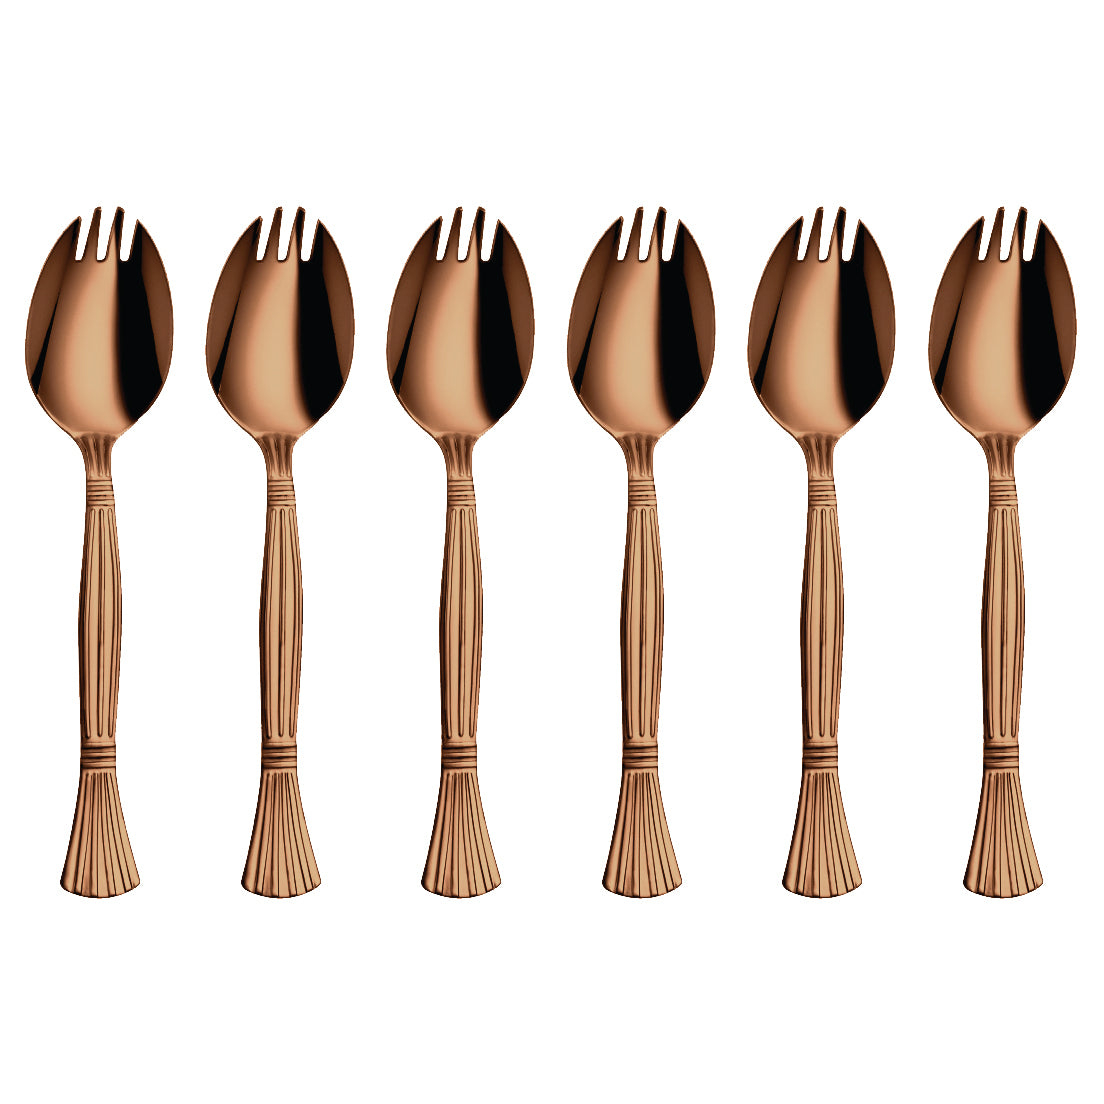 Stainless Steel 6 PCS Cutlery with Rose Gold PVD Coating Spork 2 IN 1